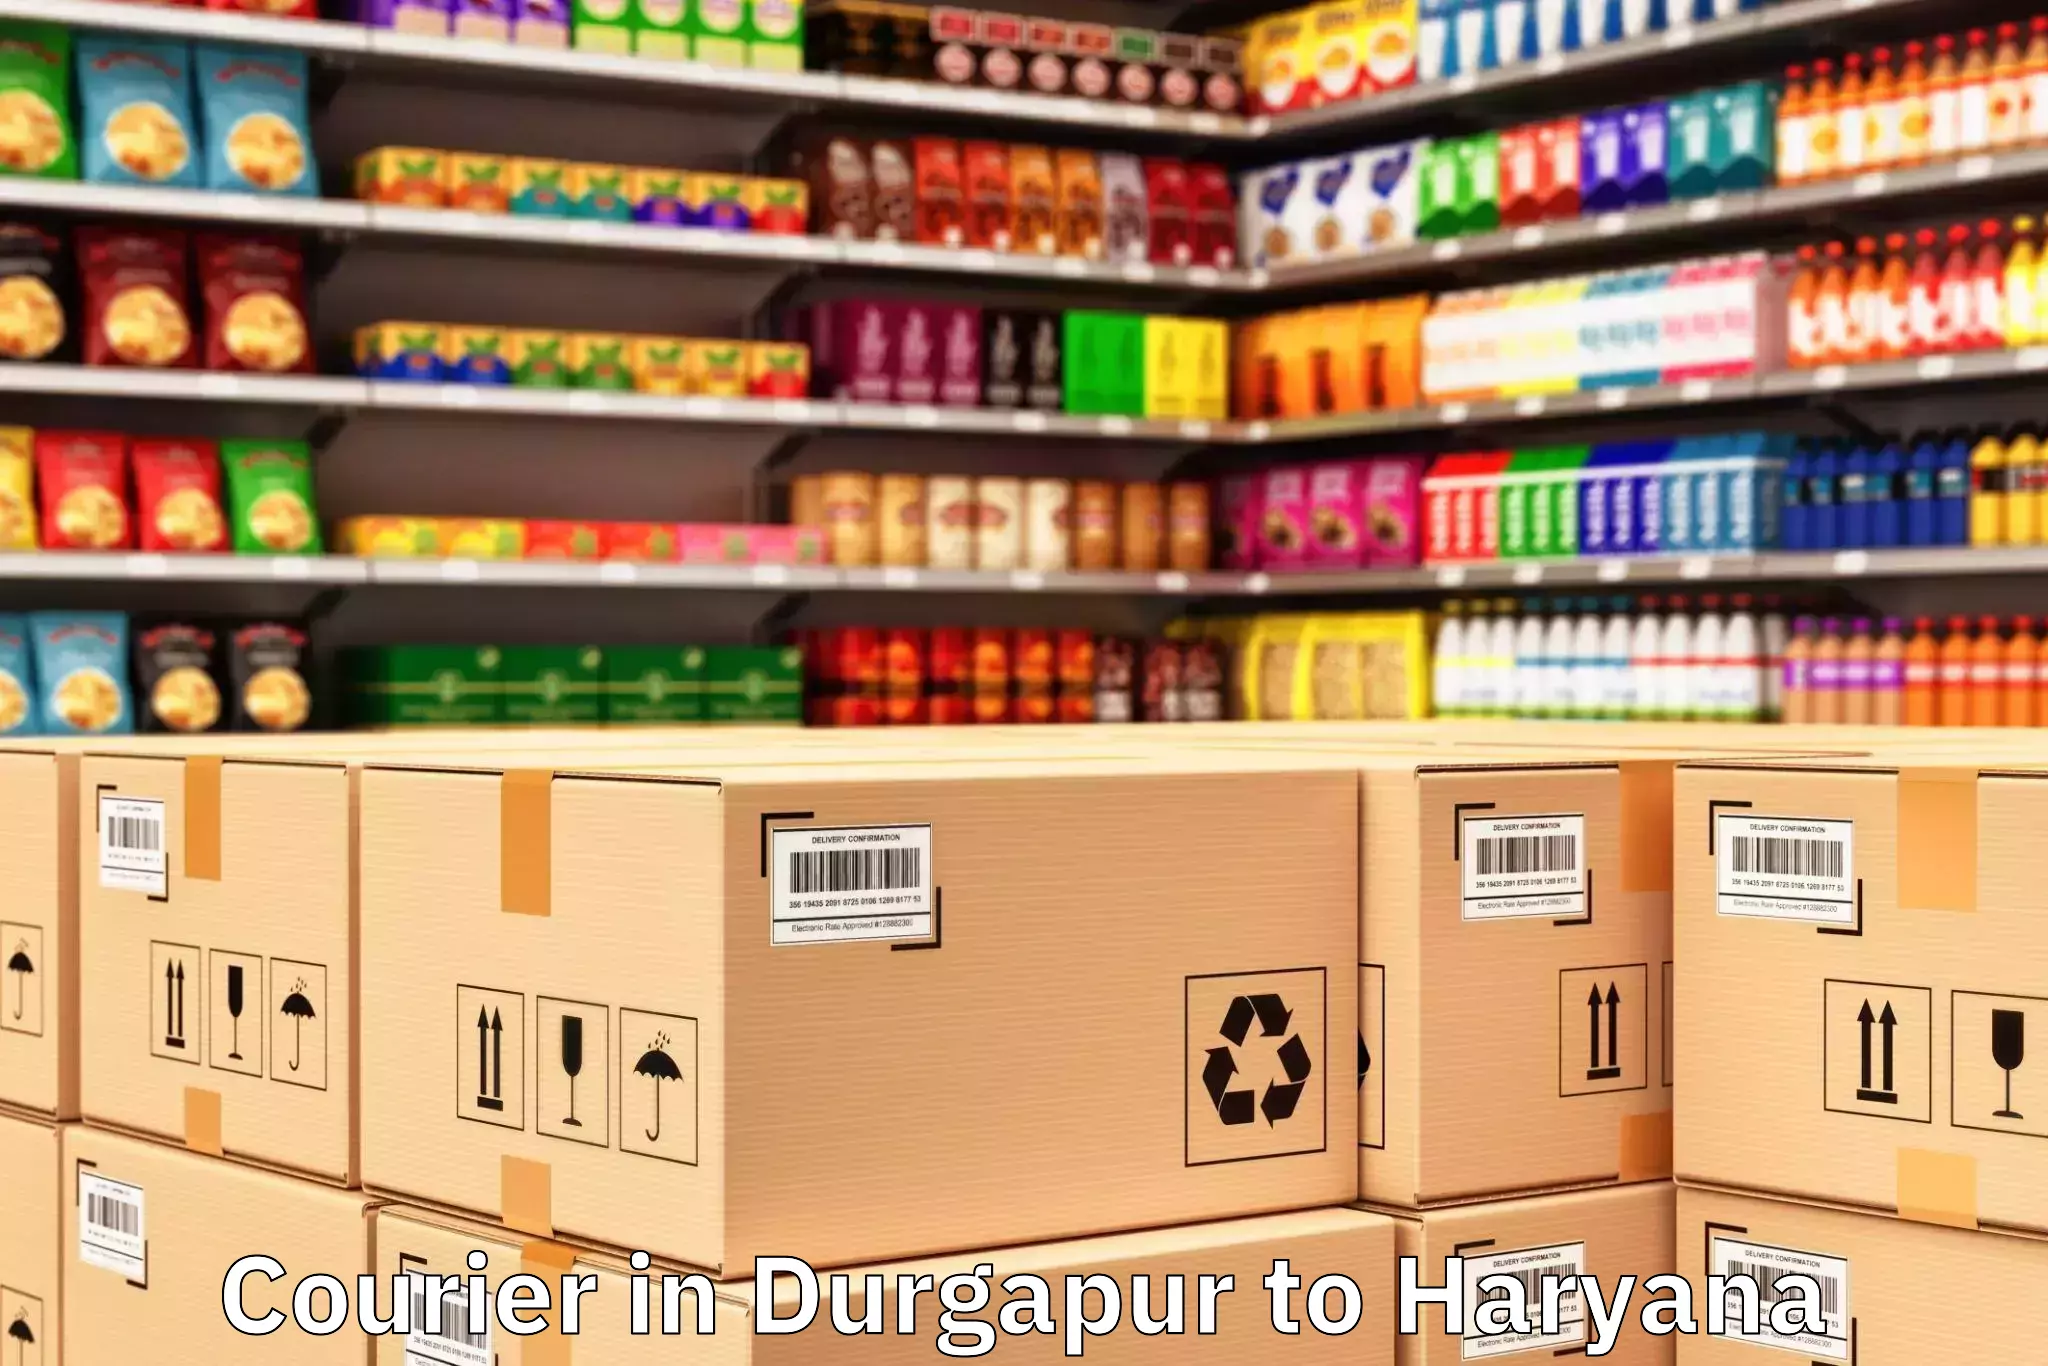 Comprehensive Durgapur to Haryana Courier